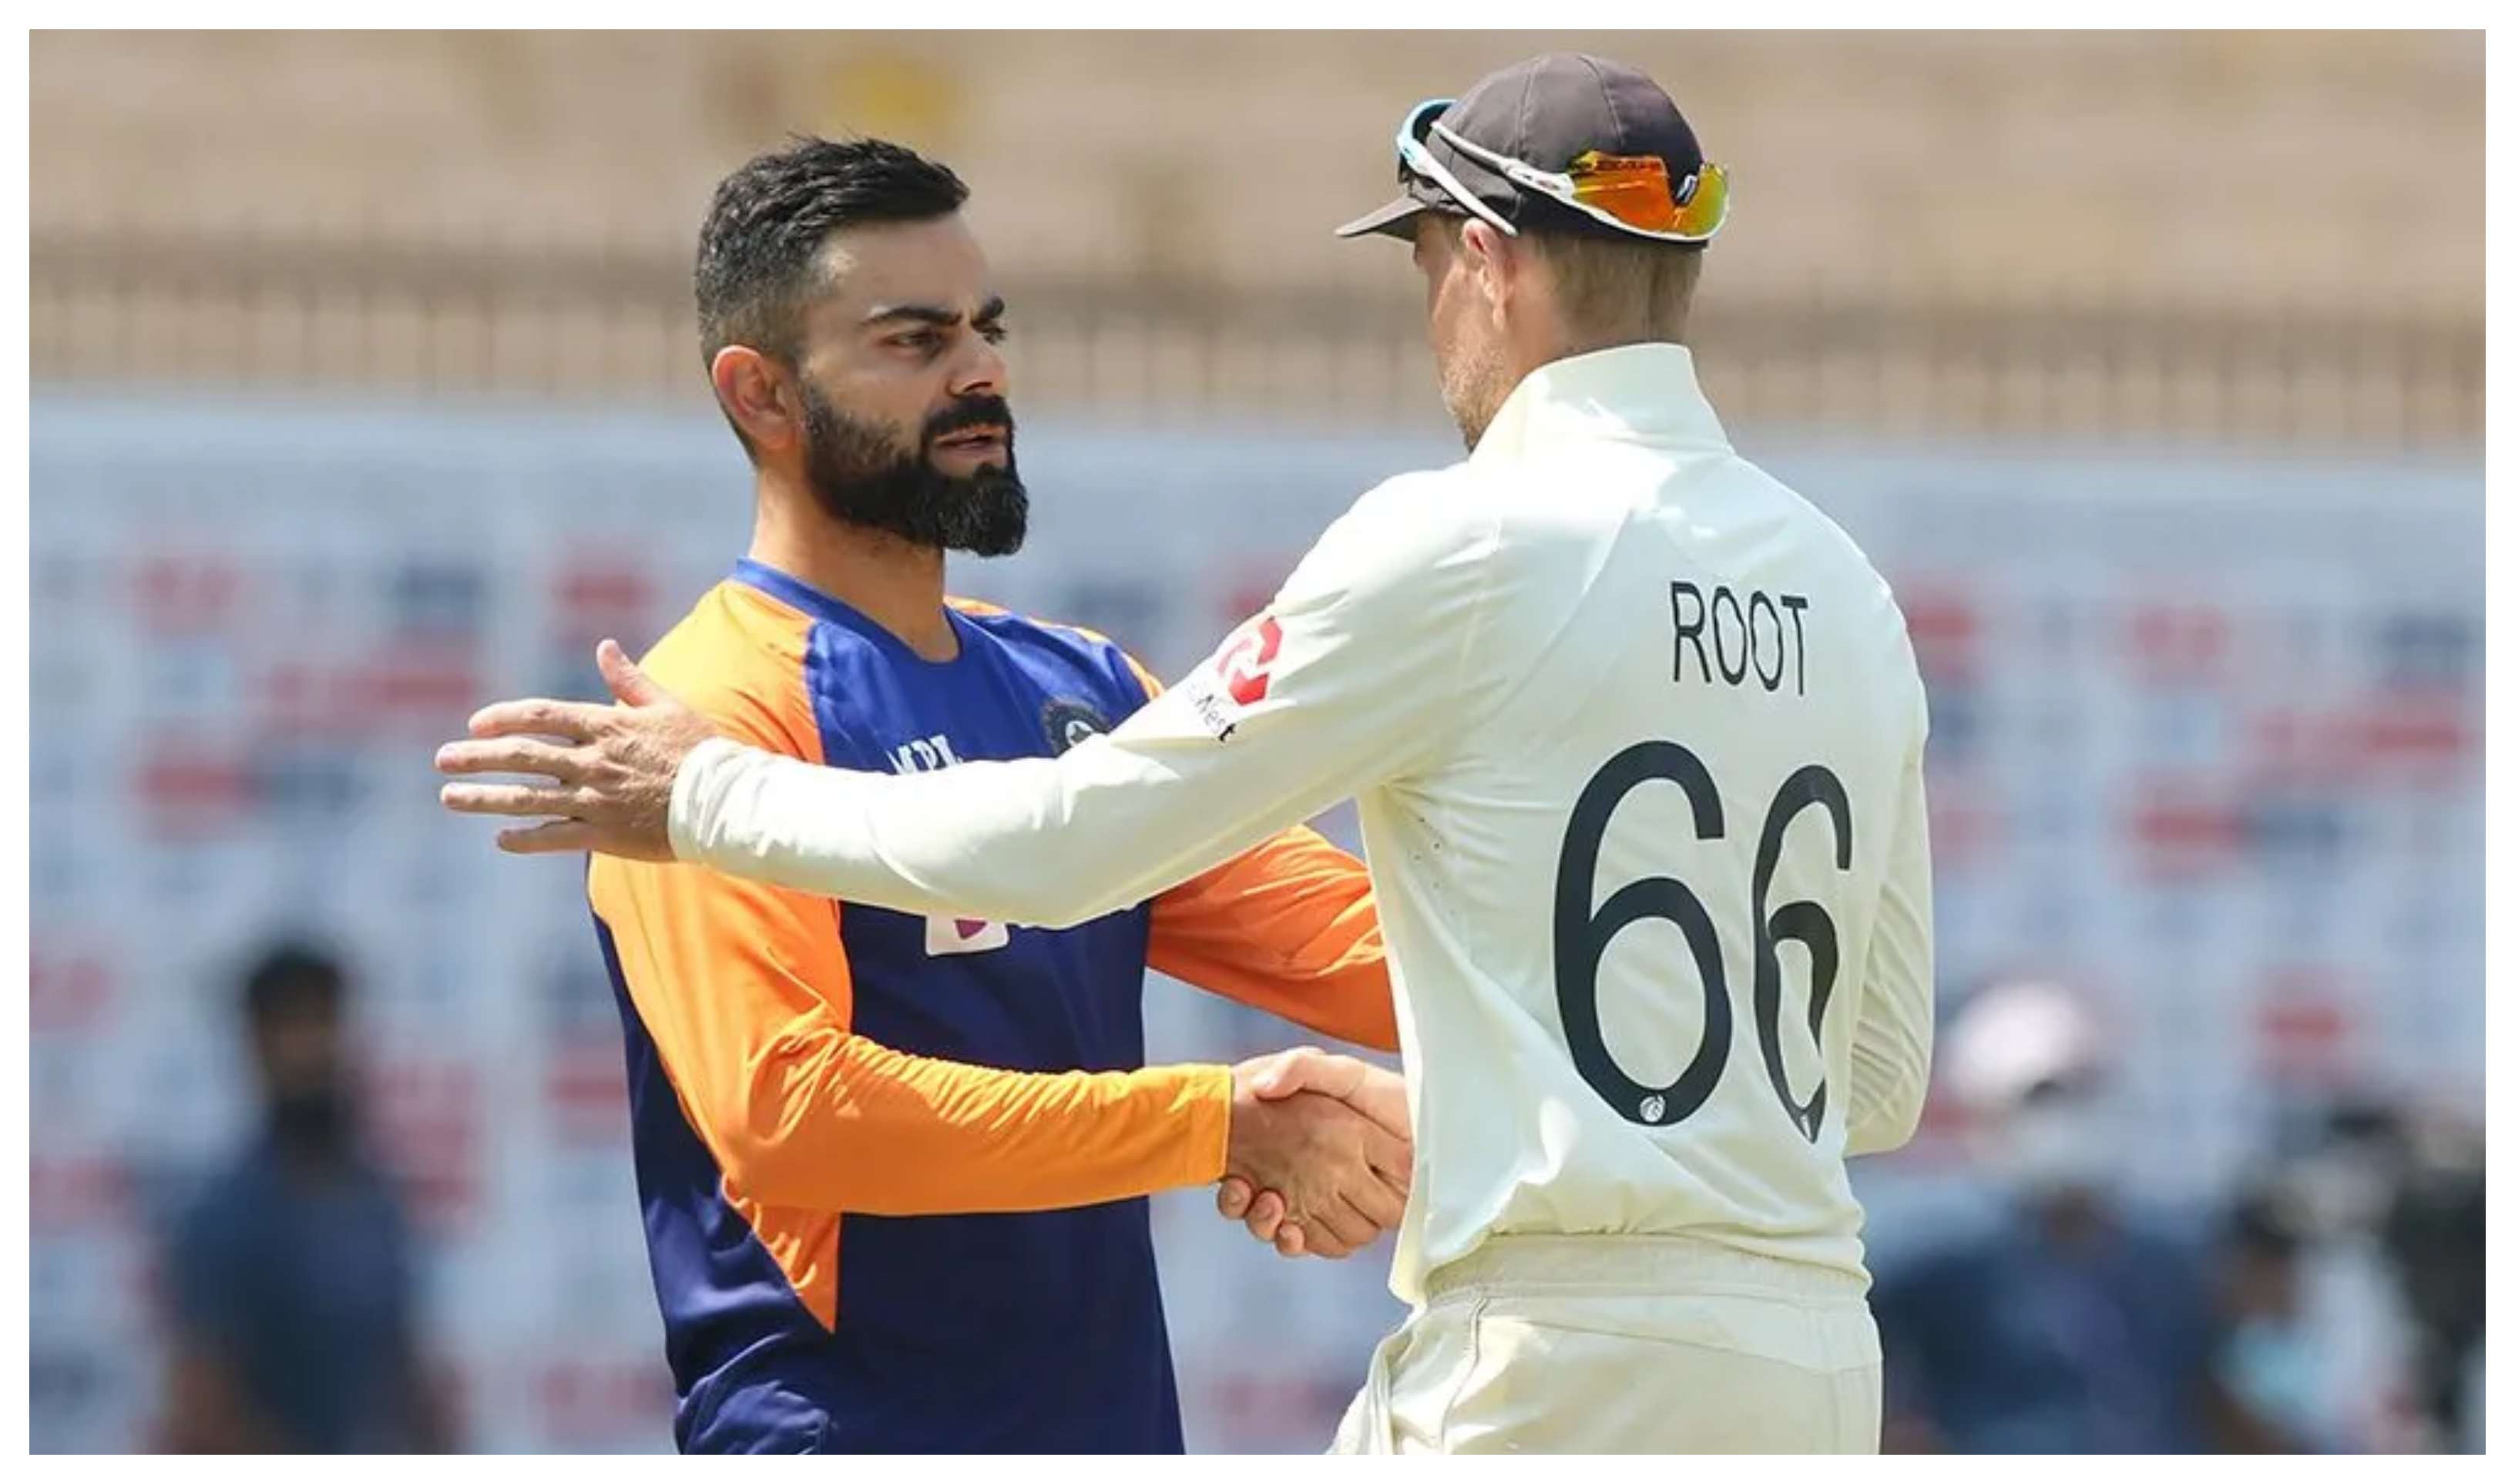 Virat Kohli shakes hand with Joe Root after the conclusion of first Test in Chennai | BCCI